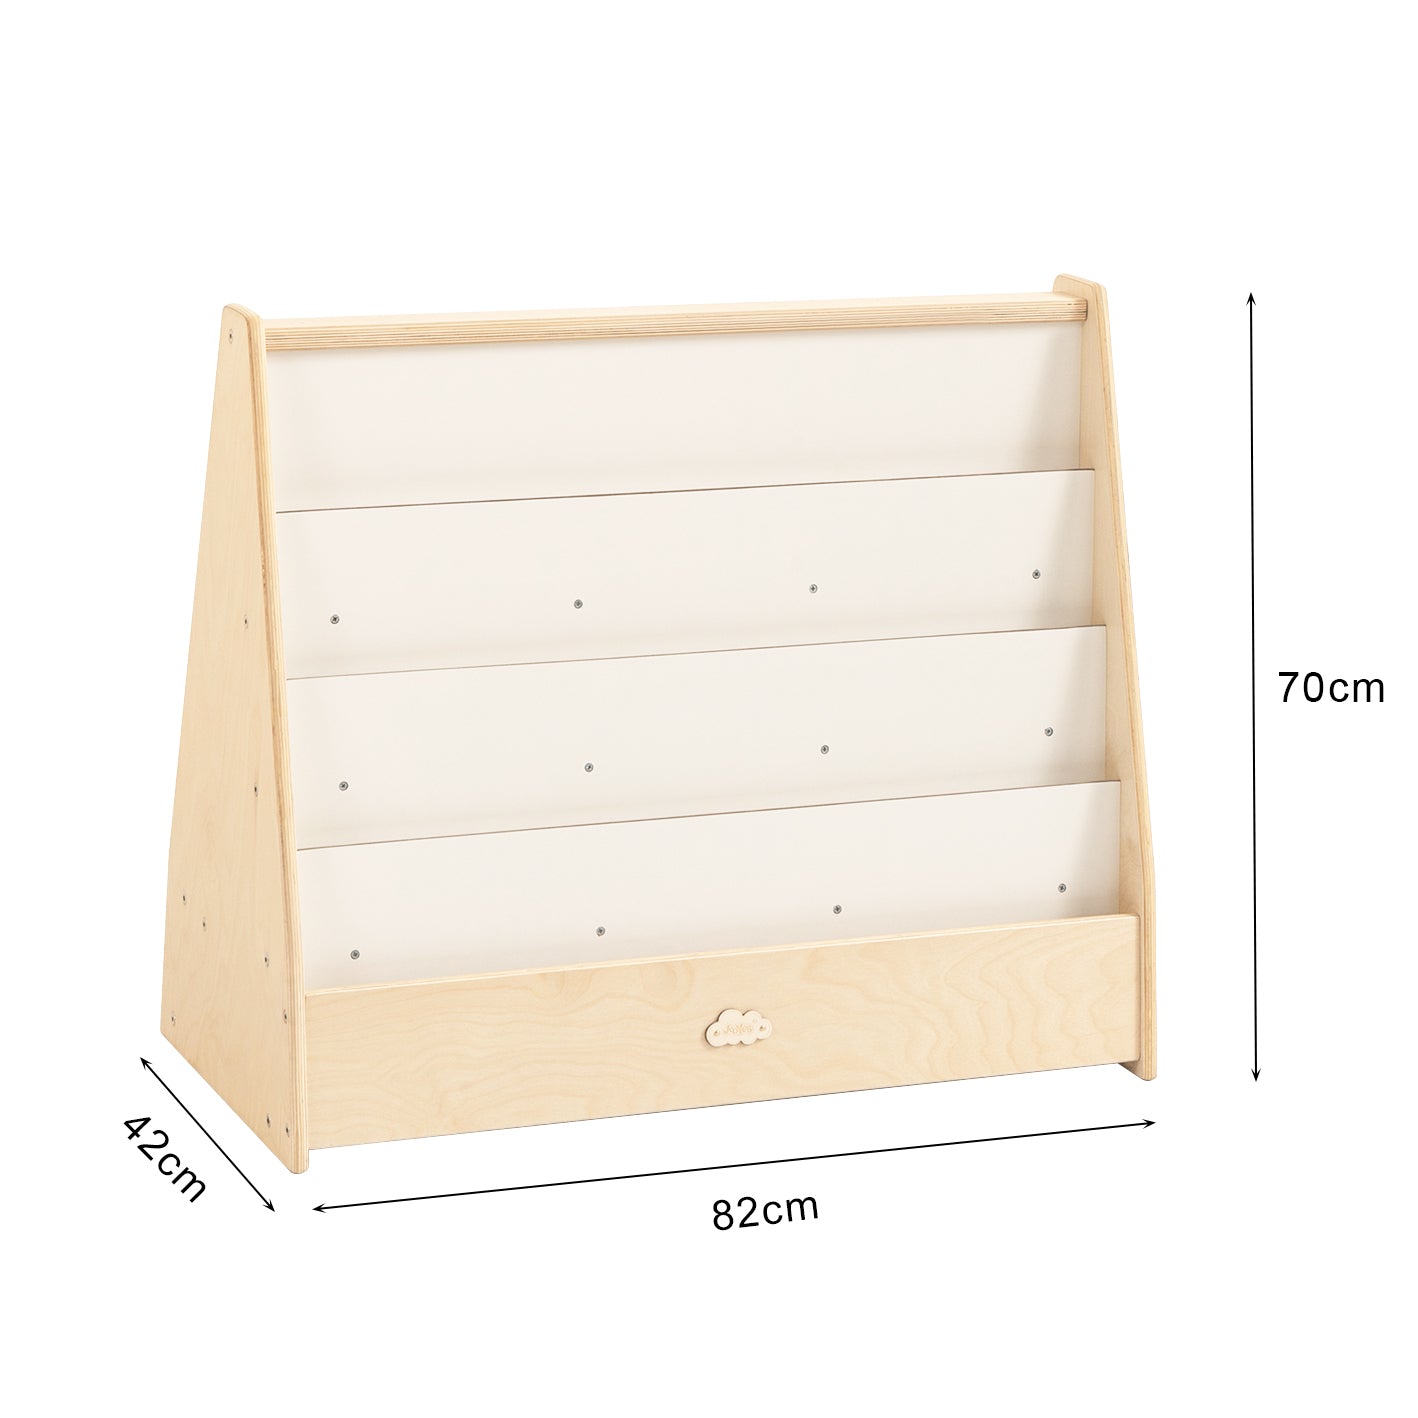 Jooyes Kids 4 Tier Wooden Display Bookcase With White Board And Storage